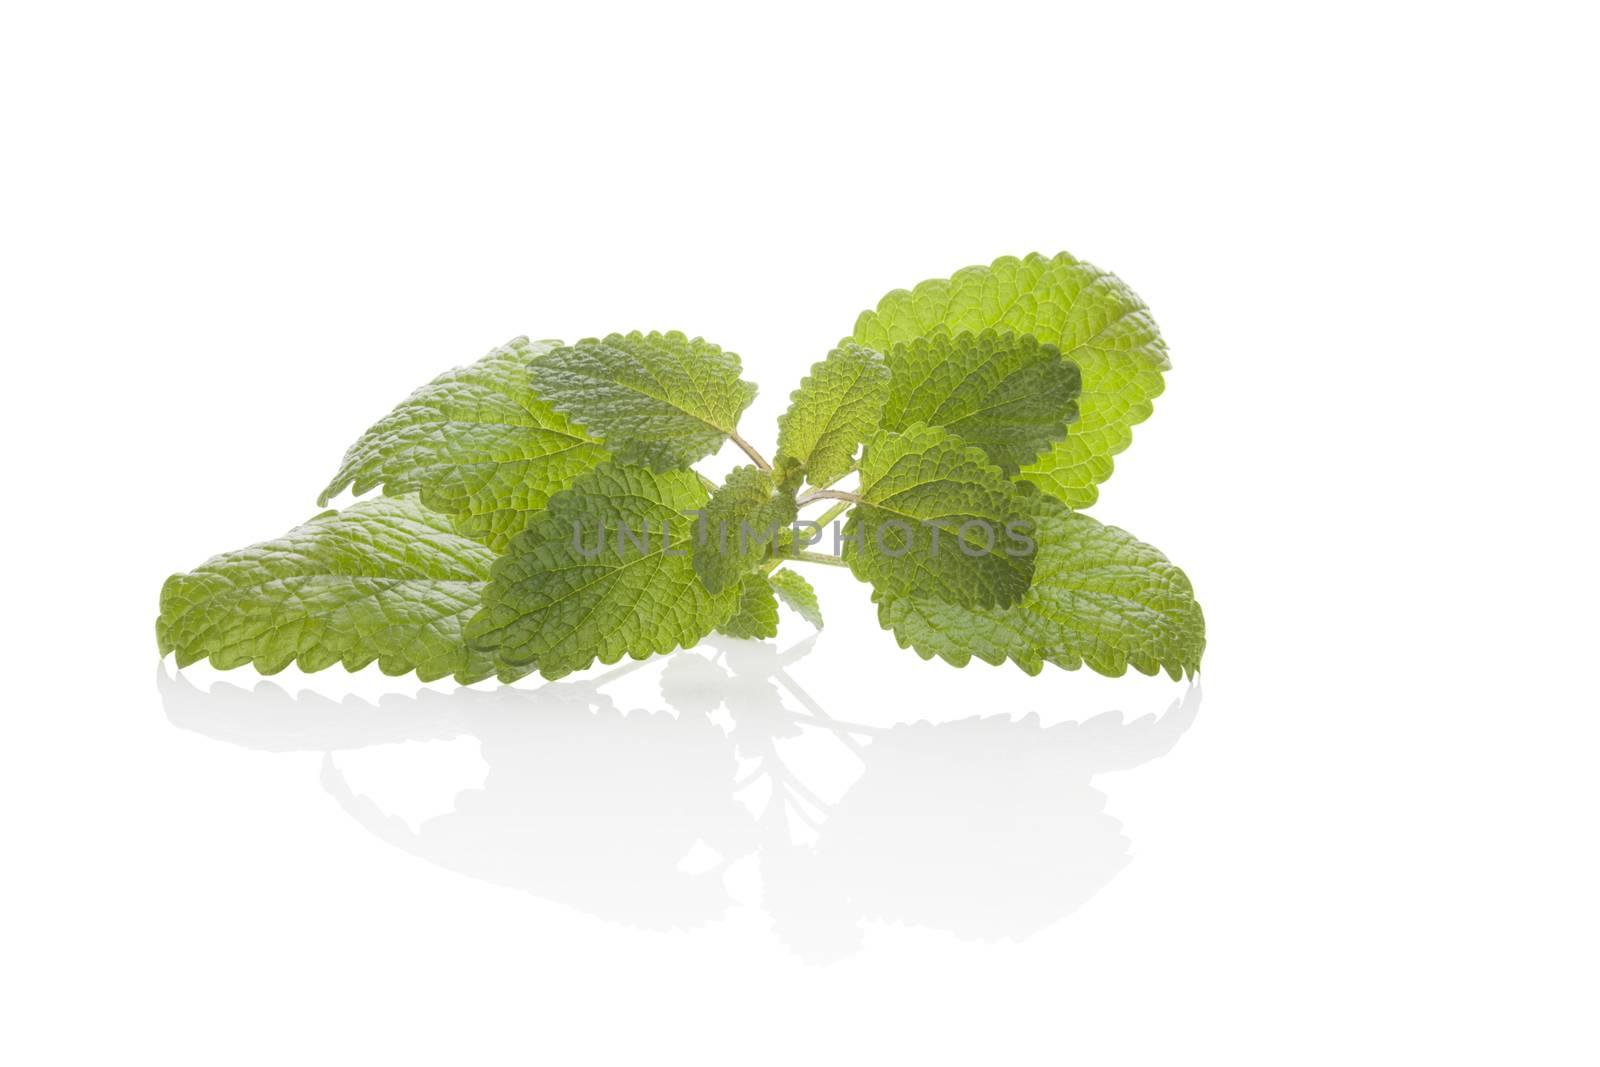 Melissa, balm mint herb isolated on white background. Culinary aromatic herb.